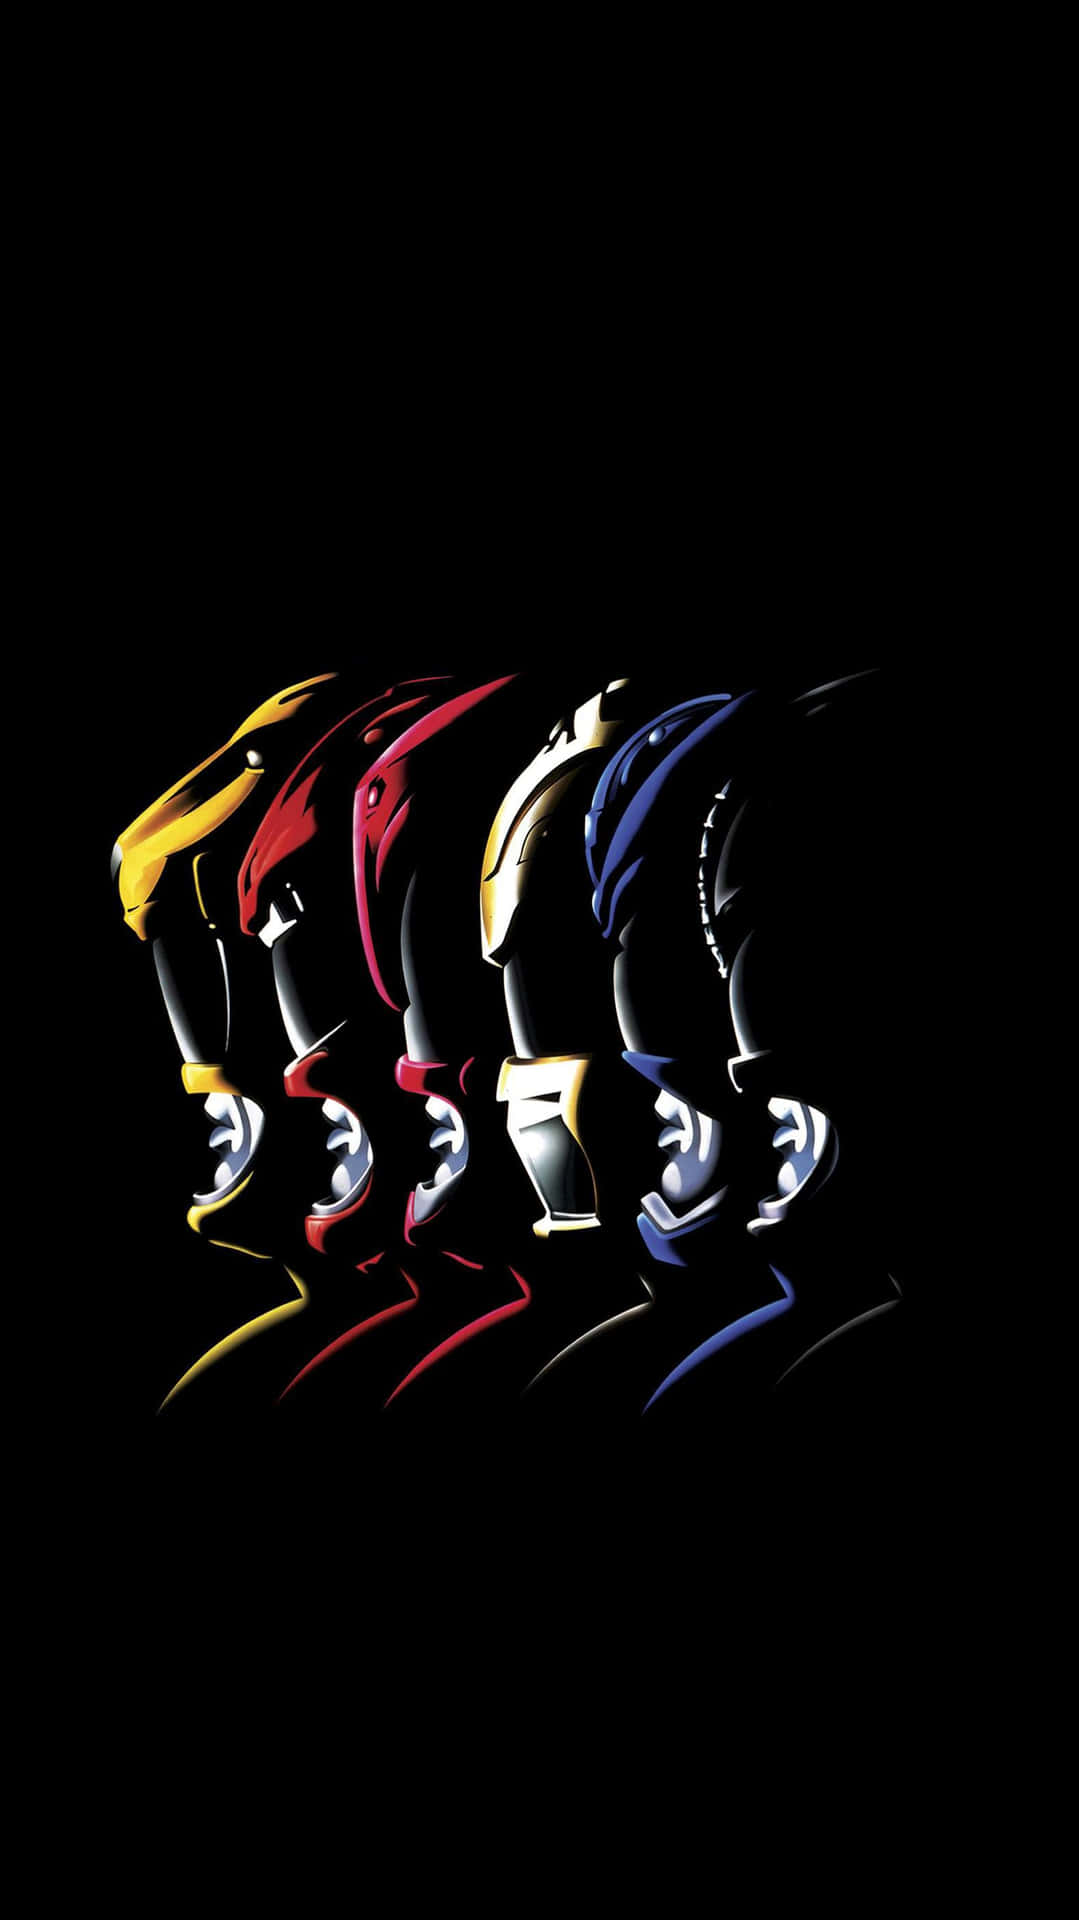 Mighty Power Rangers Ready for Action!